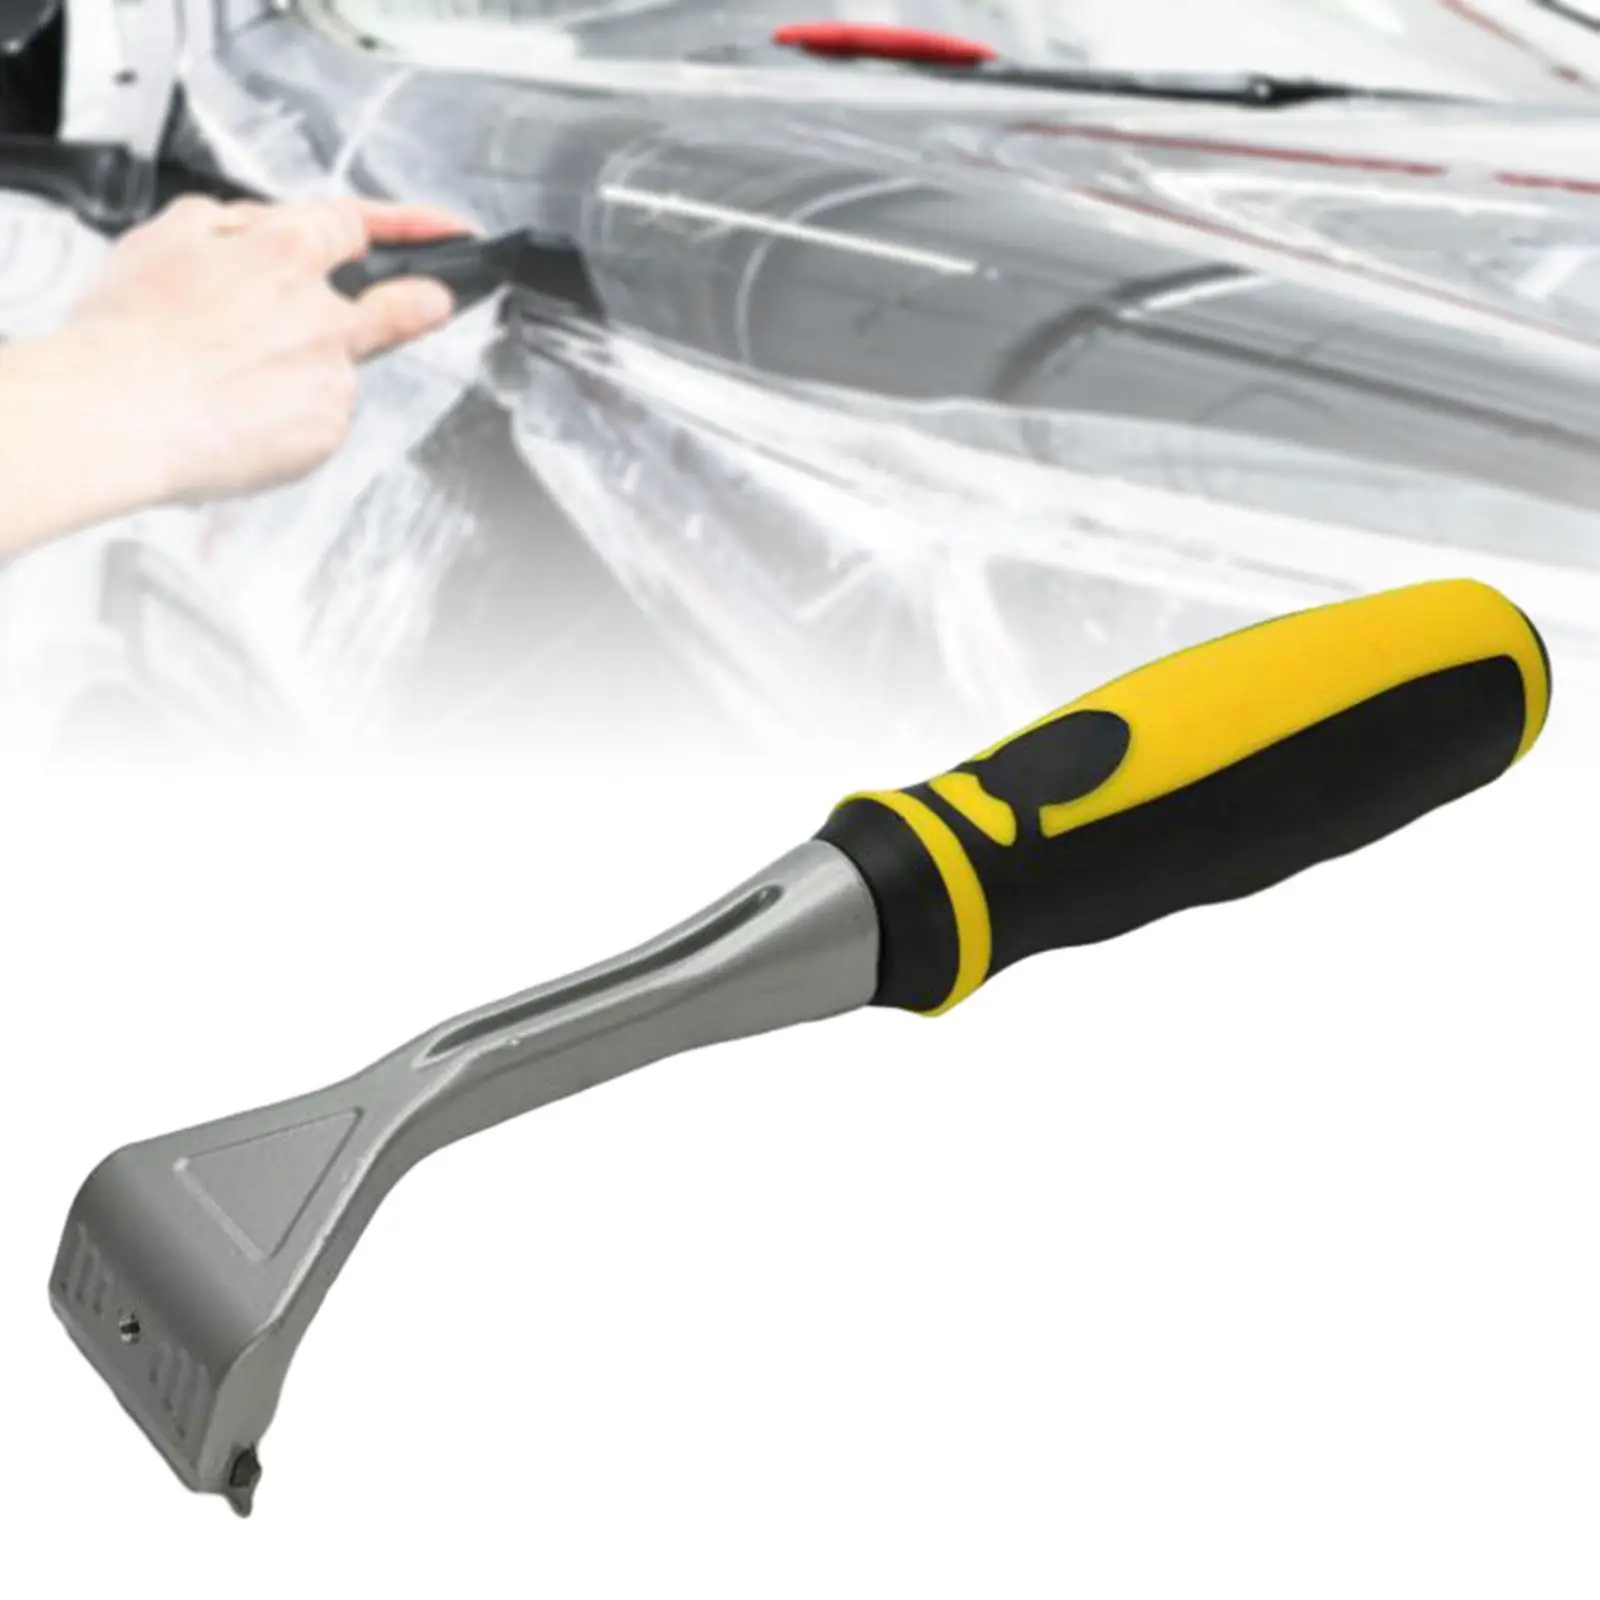 Window Wall Scraper Cleaner Remover Putty Knife for Appliance Glass Durable